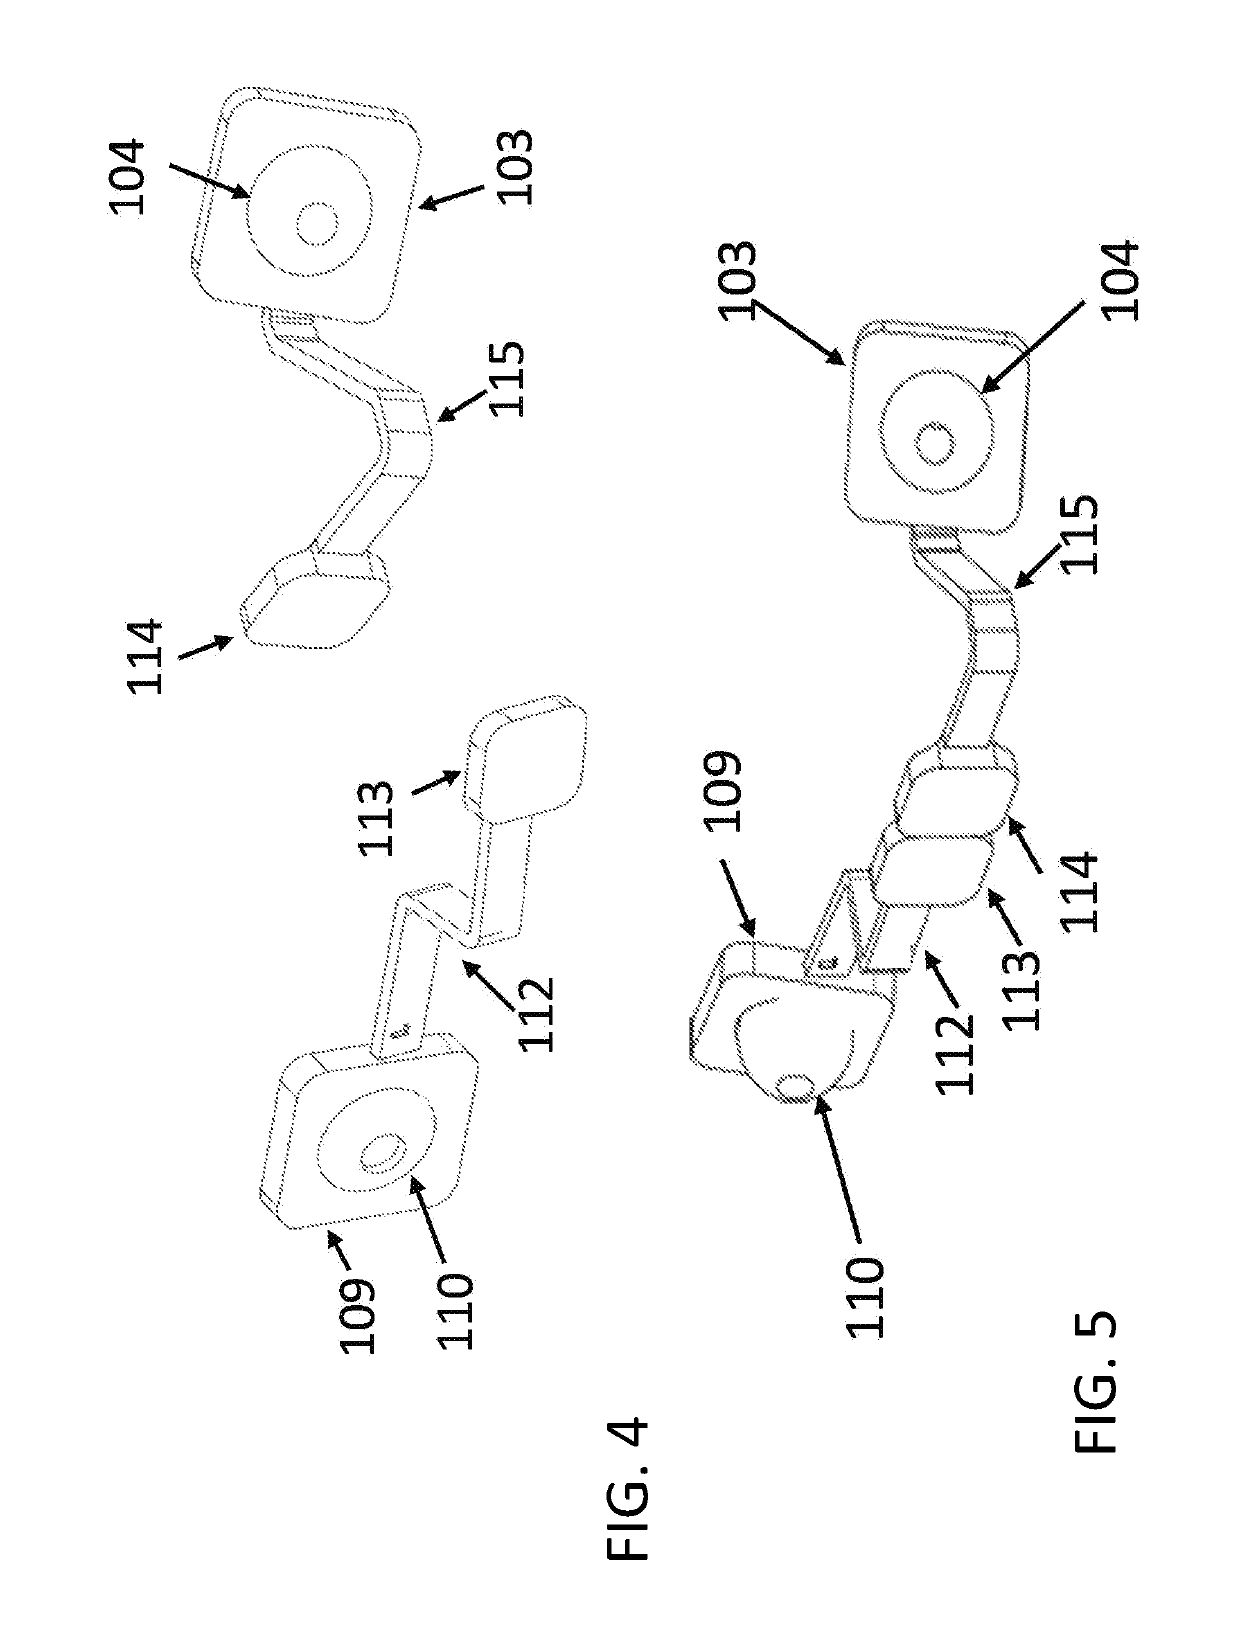 Laparoscopic Instrument Holder for Surgical Simulation and Training